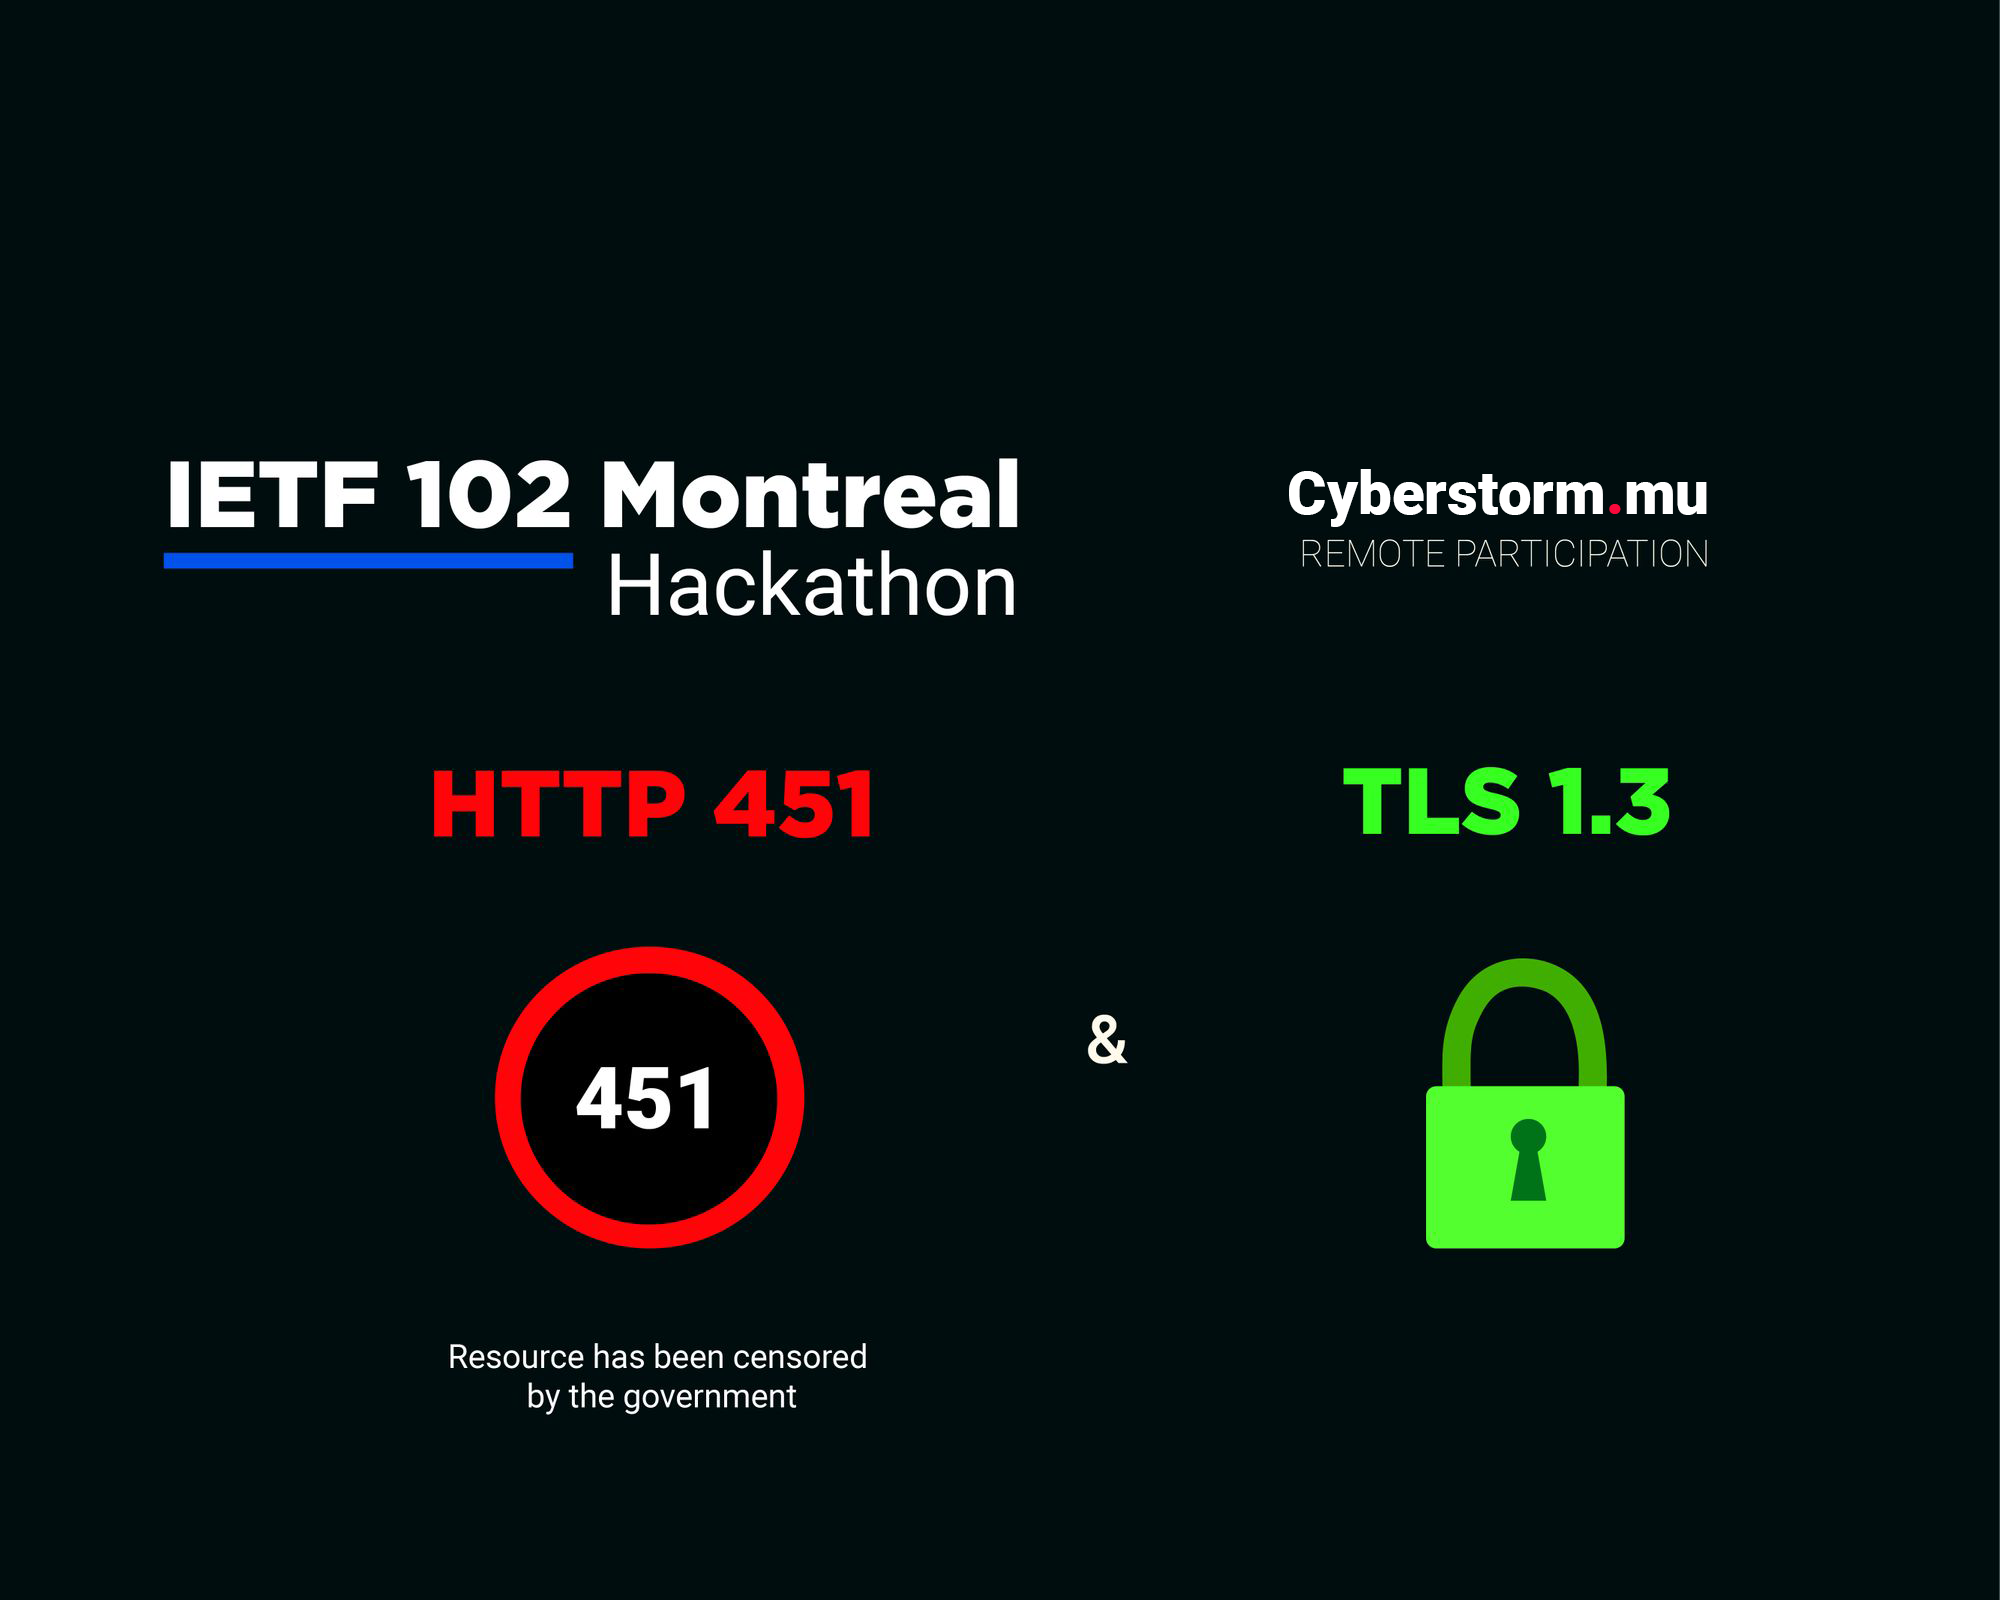 Implementing HTTP451 in Drupal during IETF102 Hackathon